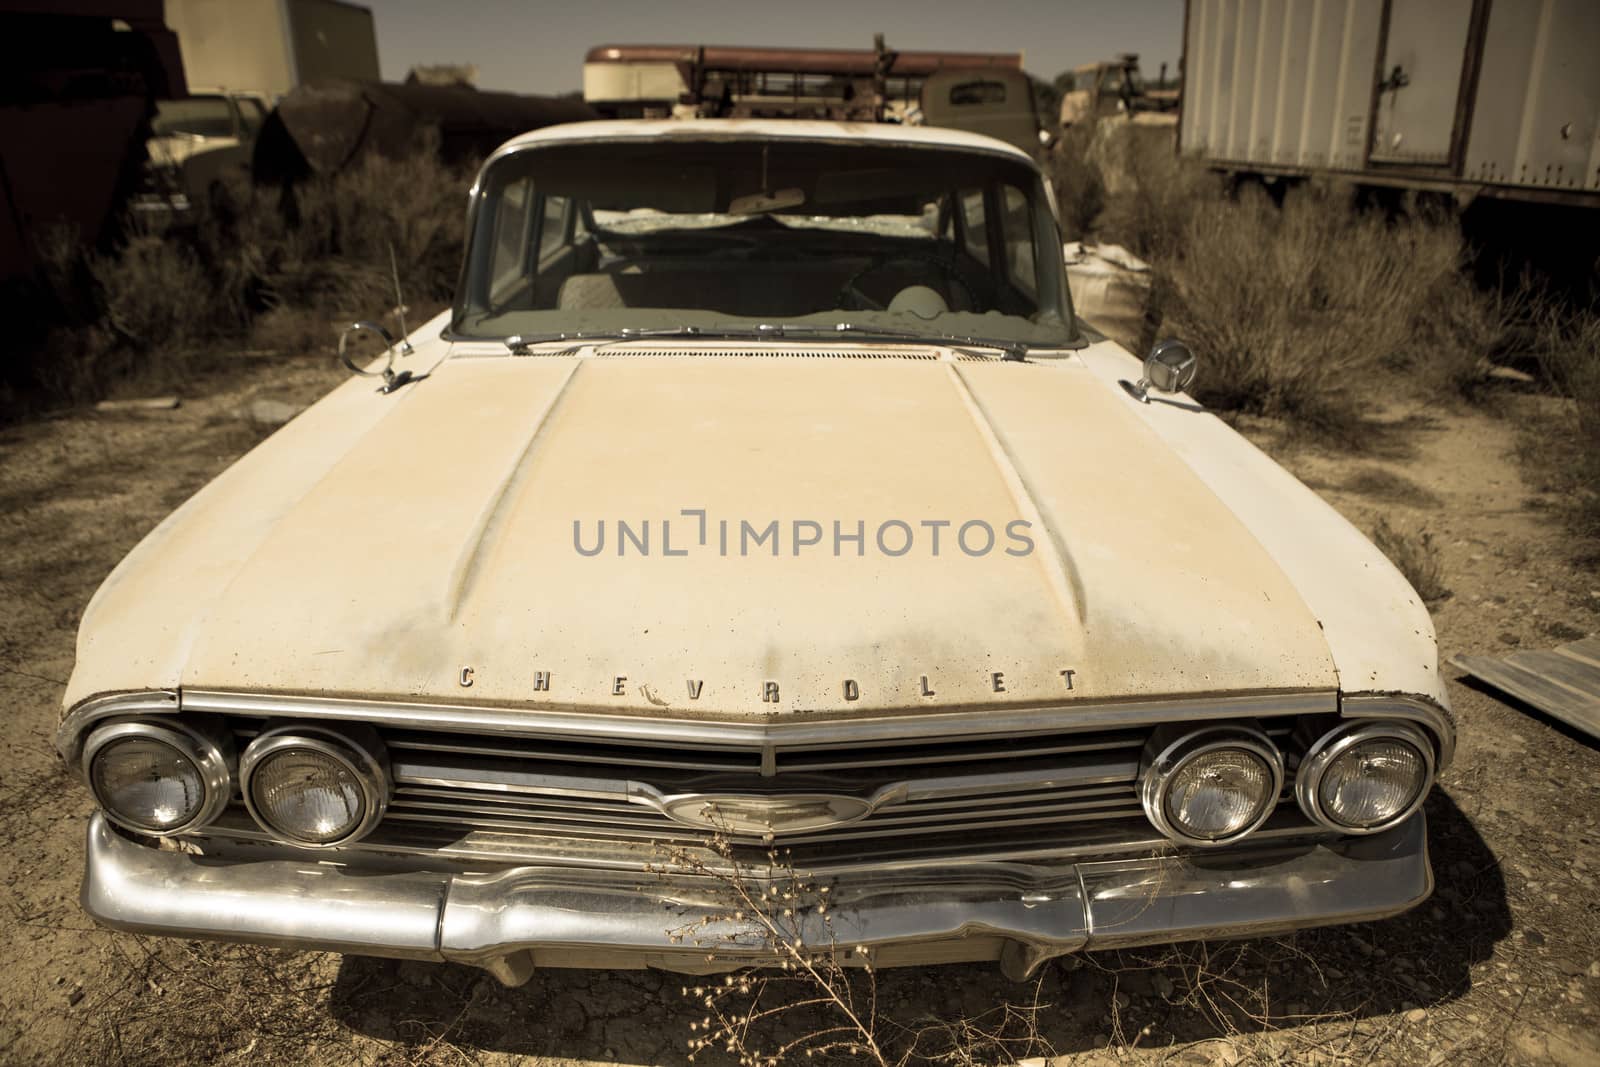 Abandoned vintage car in the Utah State by watchtheworld